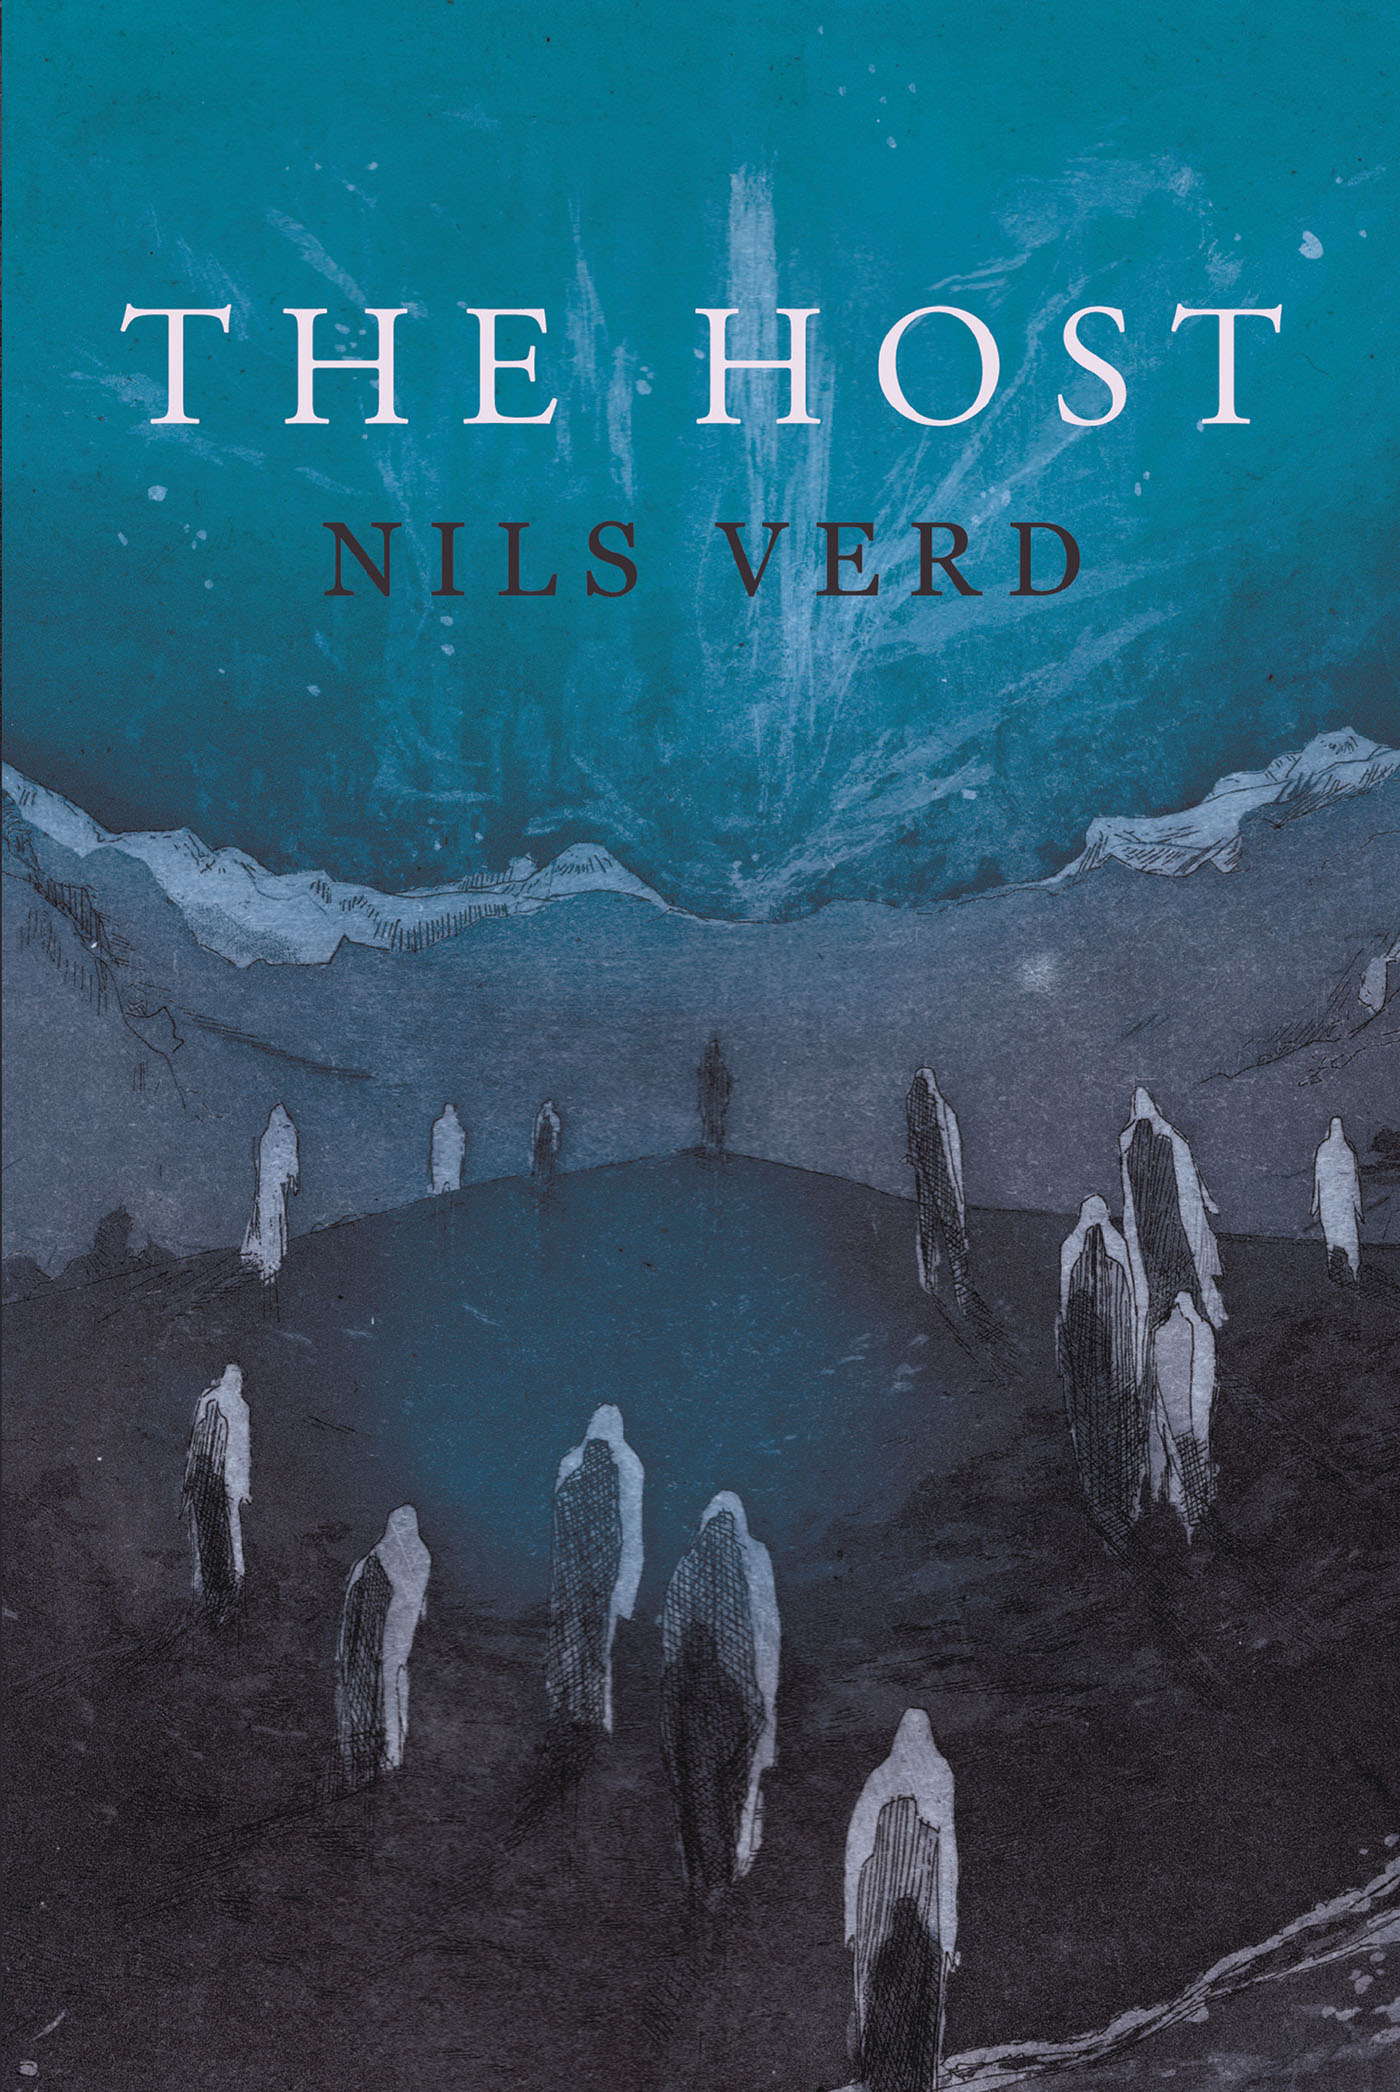 Nils Verd’s Newly Released "The Host" is a Unique Tale of Self-Discovery as an Amorphous Being Discovers the Complexities of Humanity